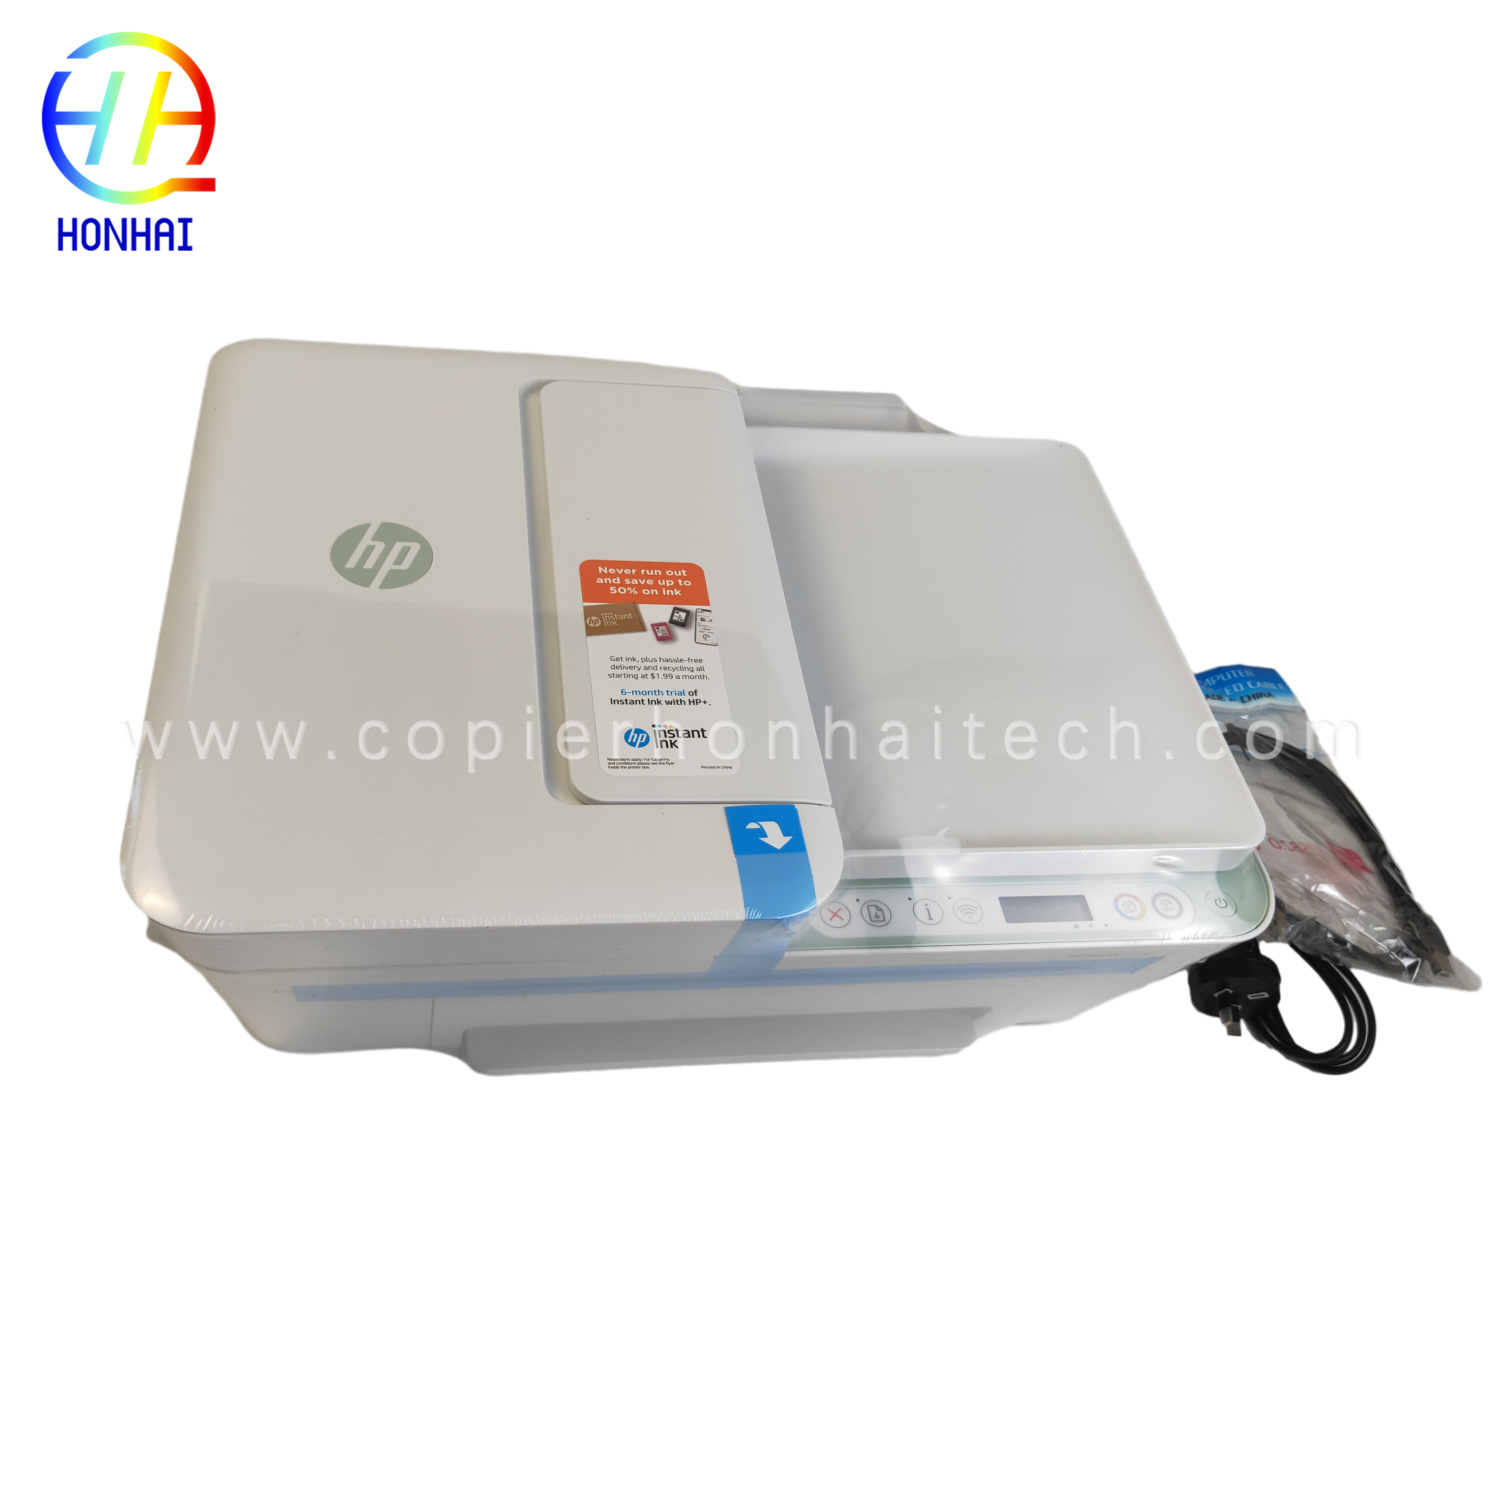 https://www.copierhonhaitech.com/origen-new-wireless-printer-for-hp-deskjet-4122e-all-in-one-printer-scan-and-copy-home-office-students-and-home- máy in-26q96a-sản phẩm/